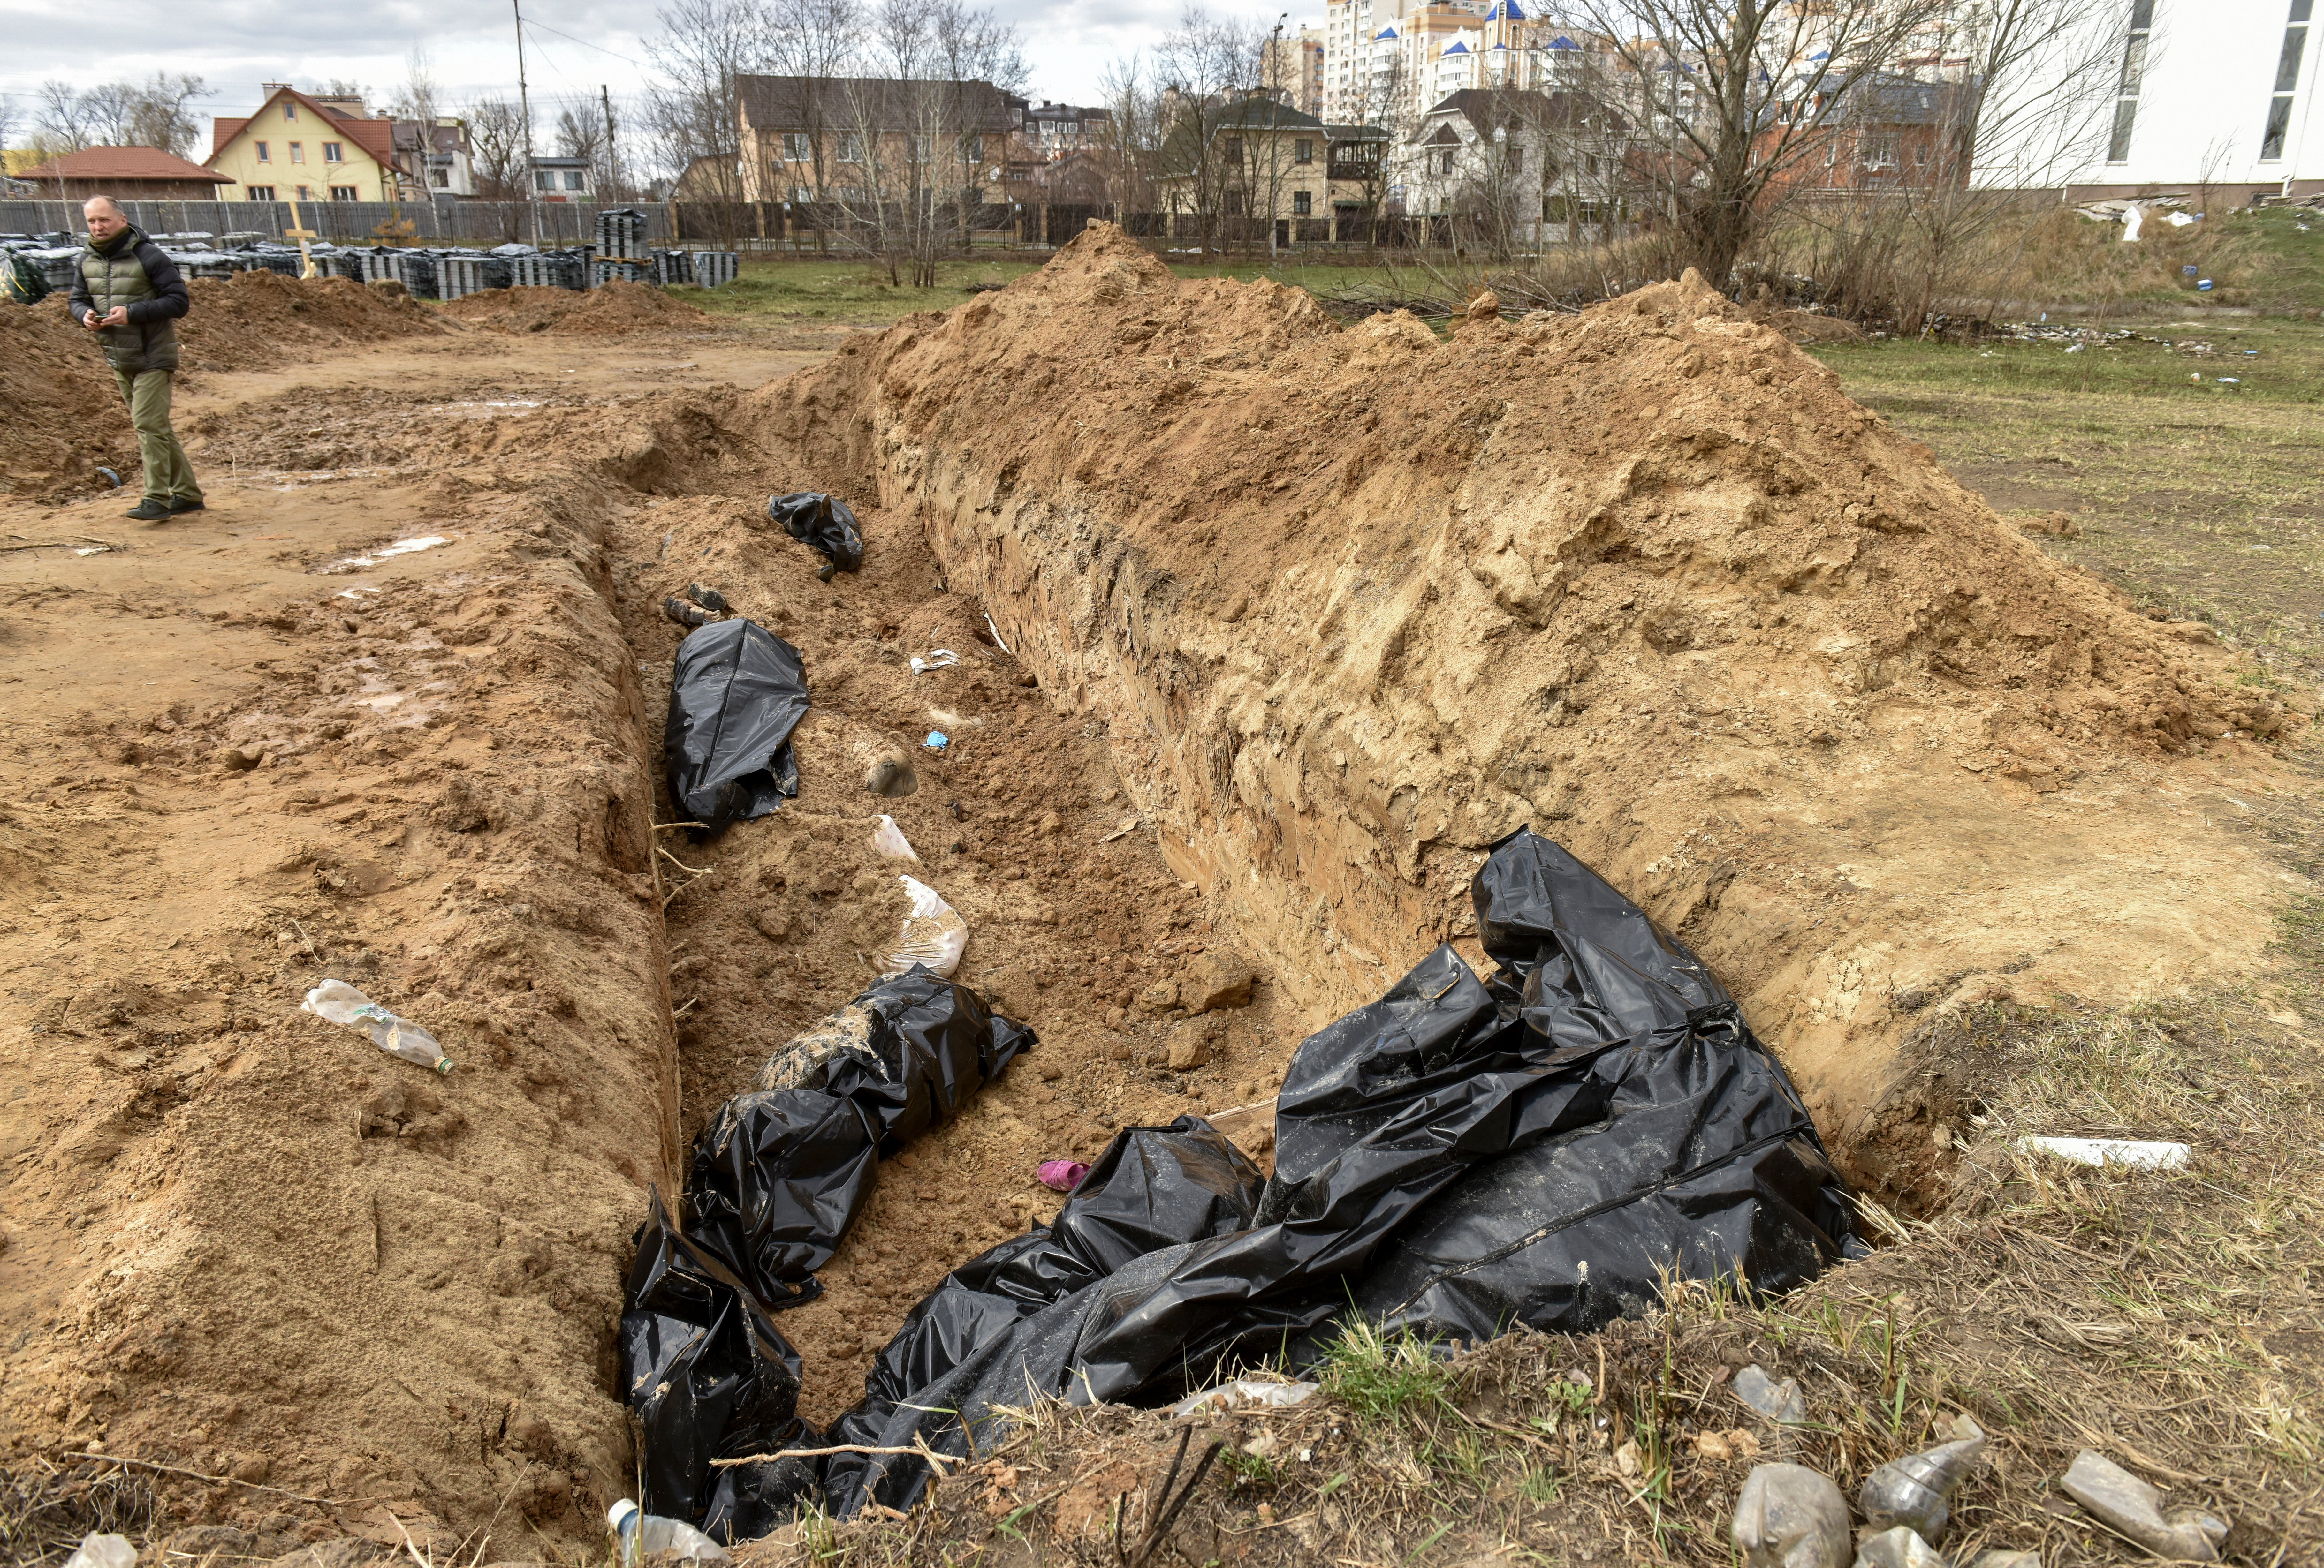 Bodies of civilians in plastic bags lay in a mass grave in Bucha